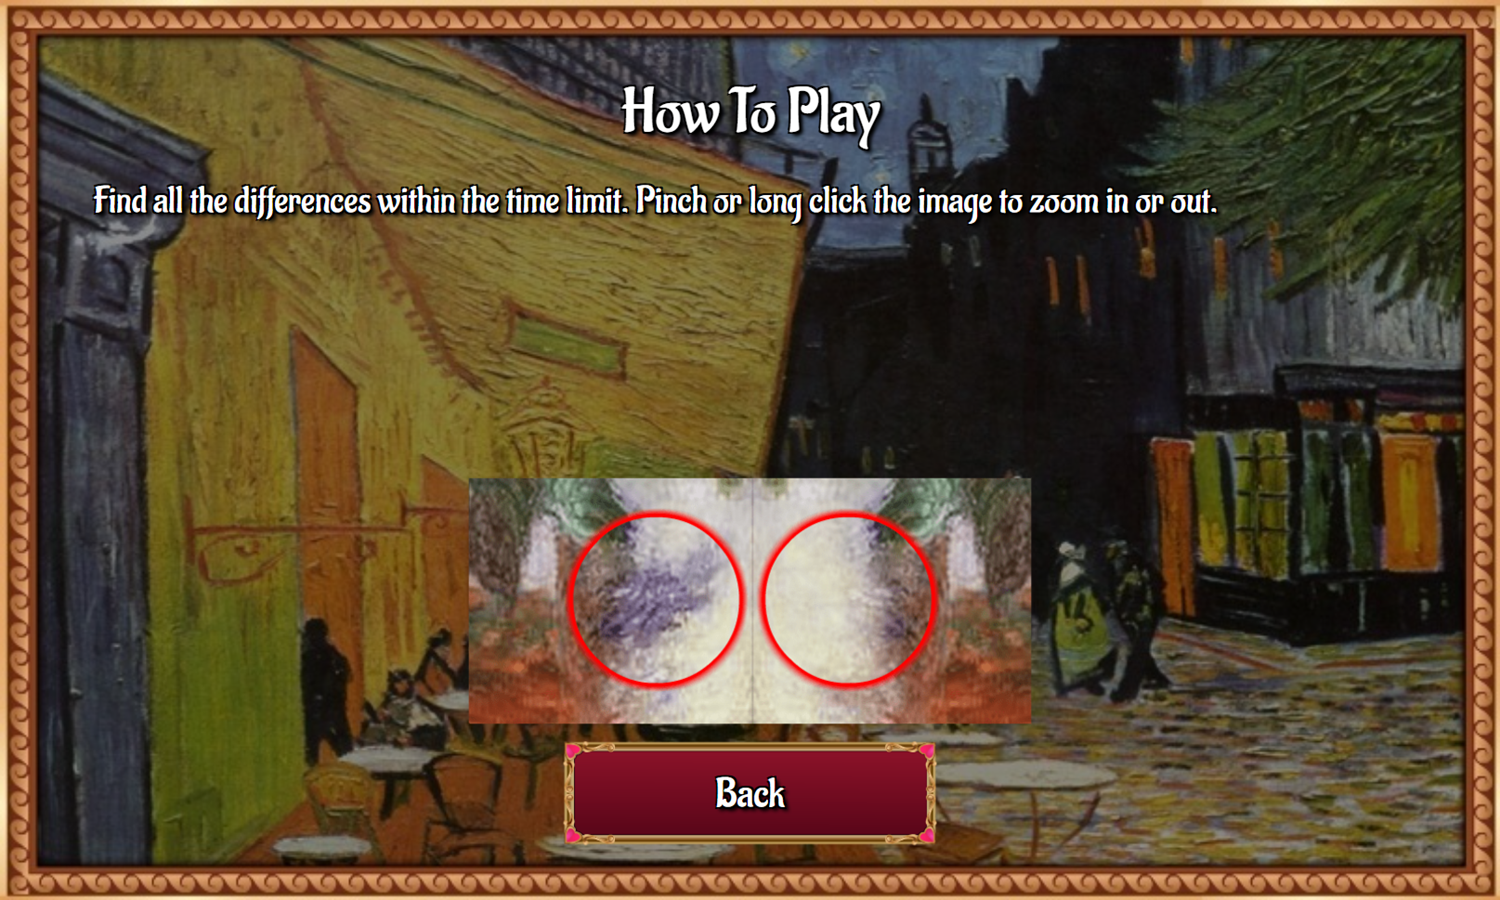 Famous Paintings 1 Game How To Play Screenshot.